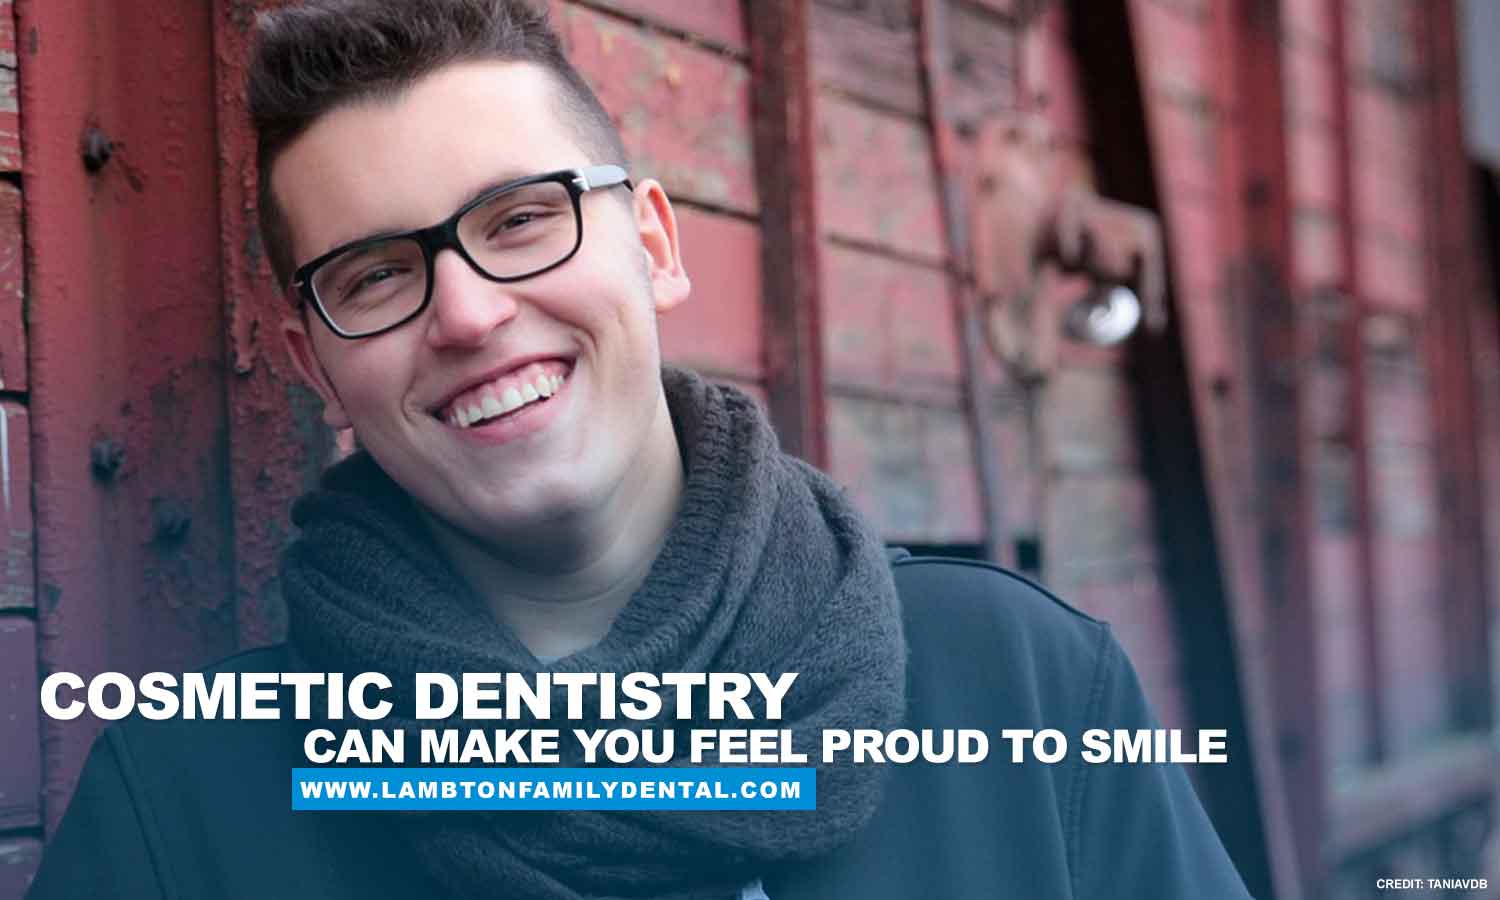 Cosmetic dentistry can make you feel proud